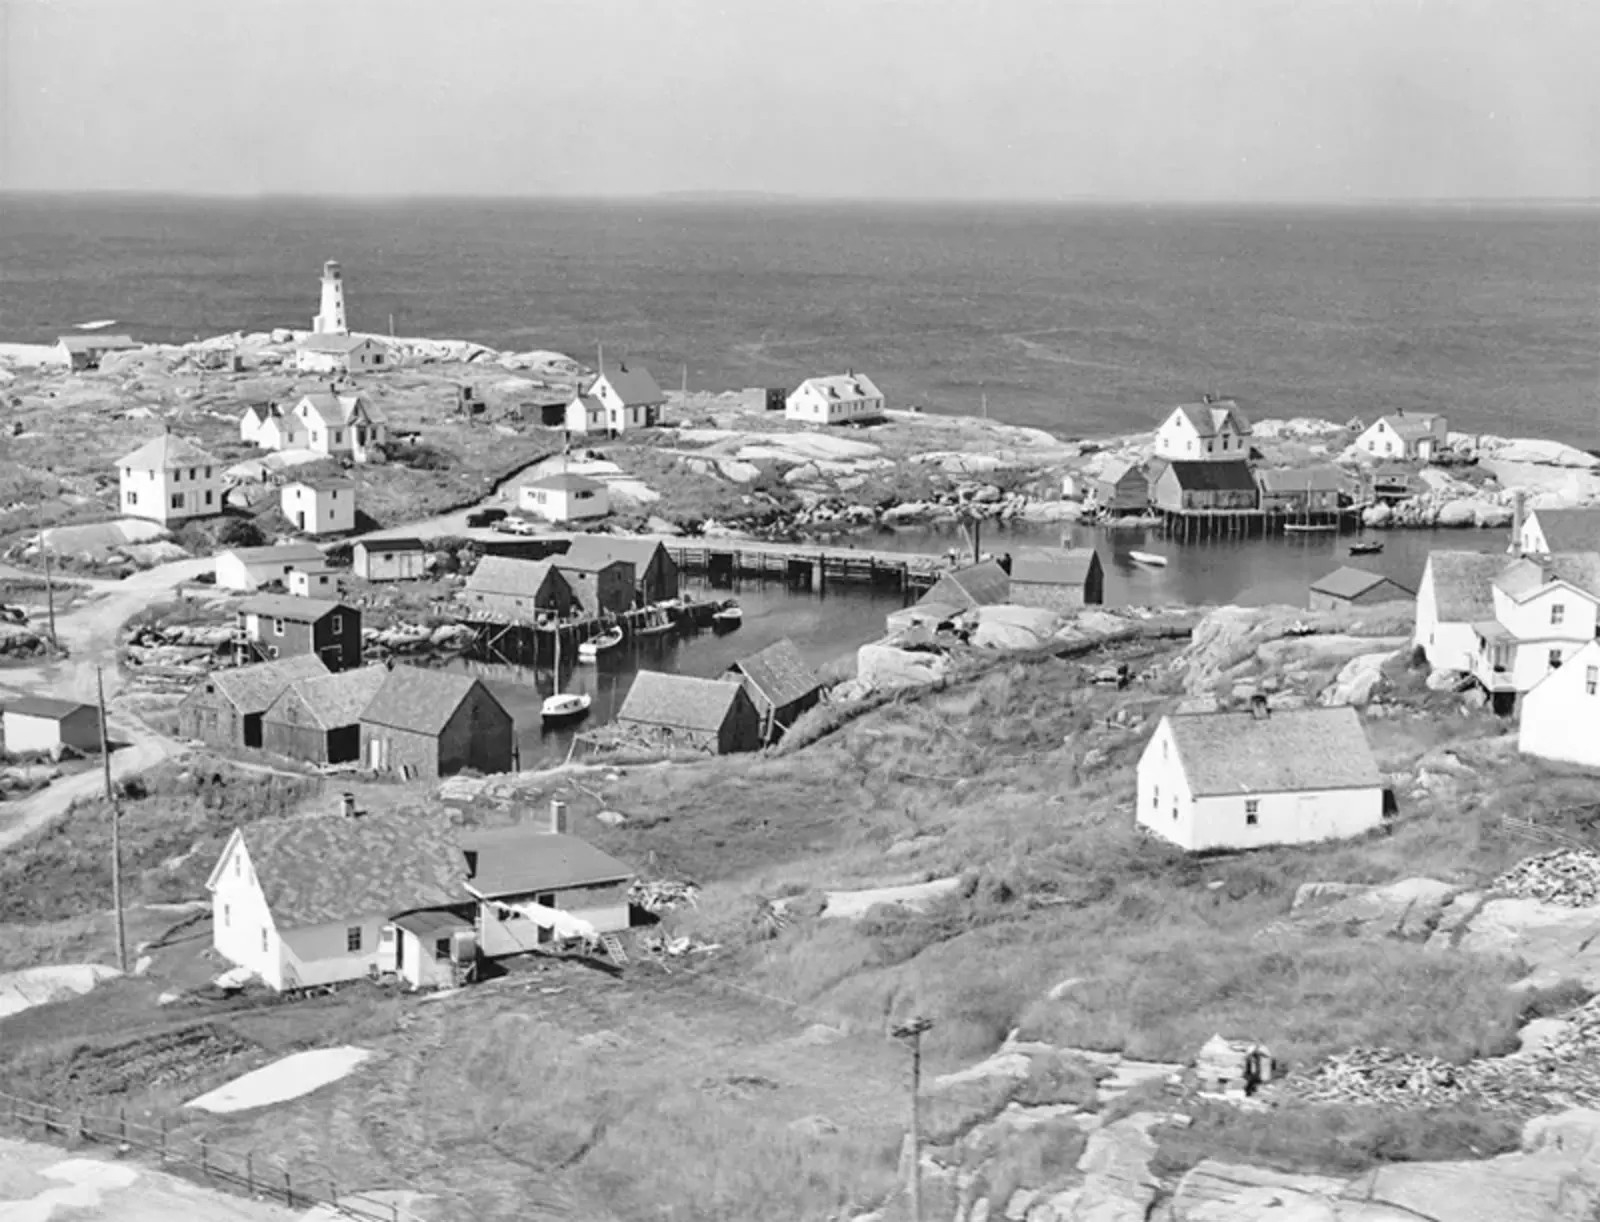 Peggy’s Point Lighthouse in 1955 with Peggy’s Cove in foreground